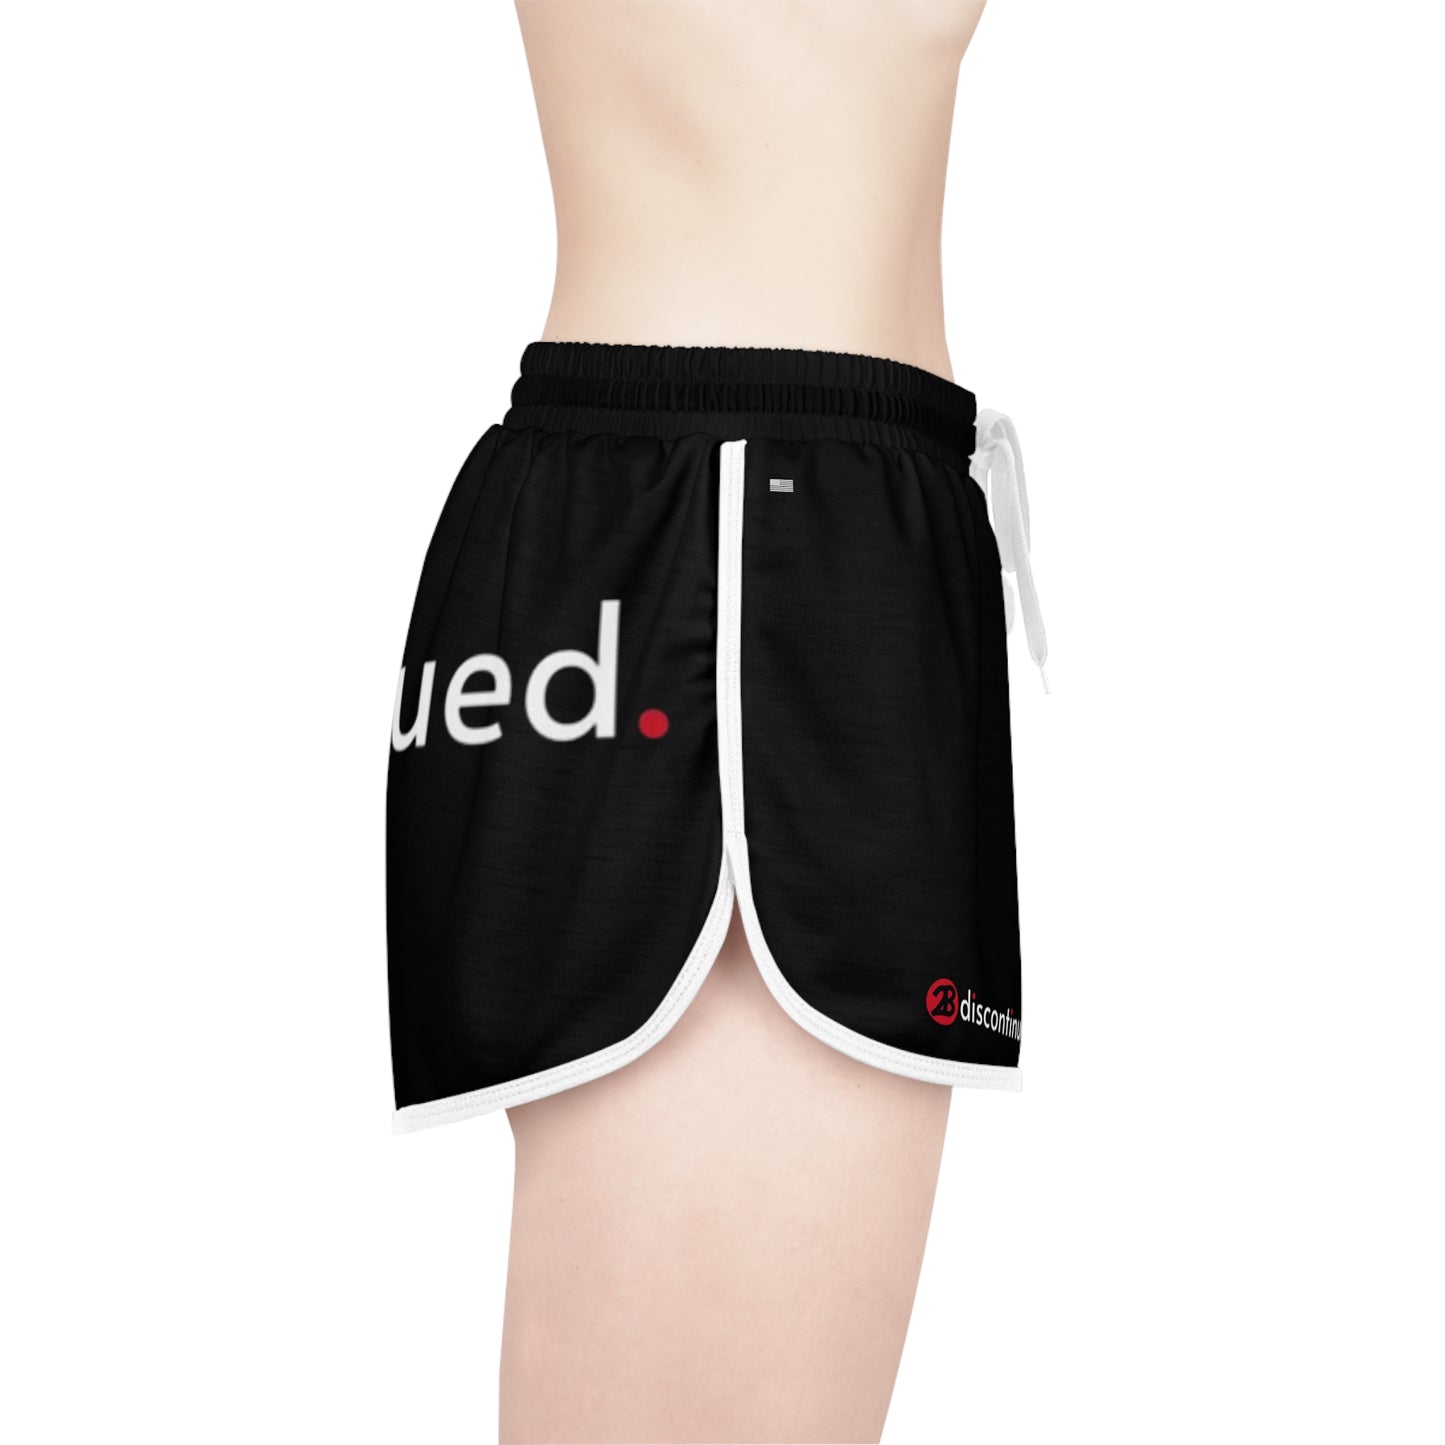 2Bdiscontinued. women's relaxed sports shorts blkdsc